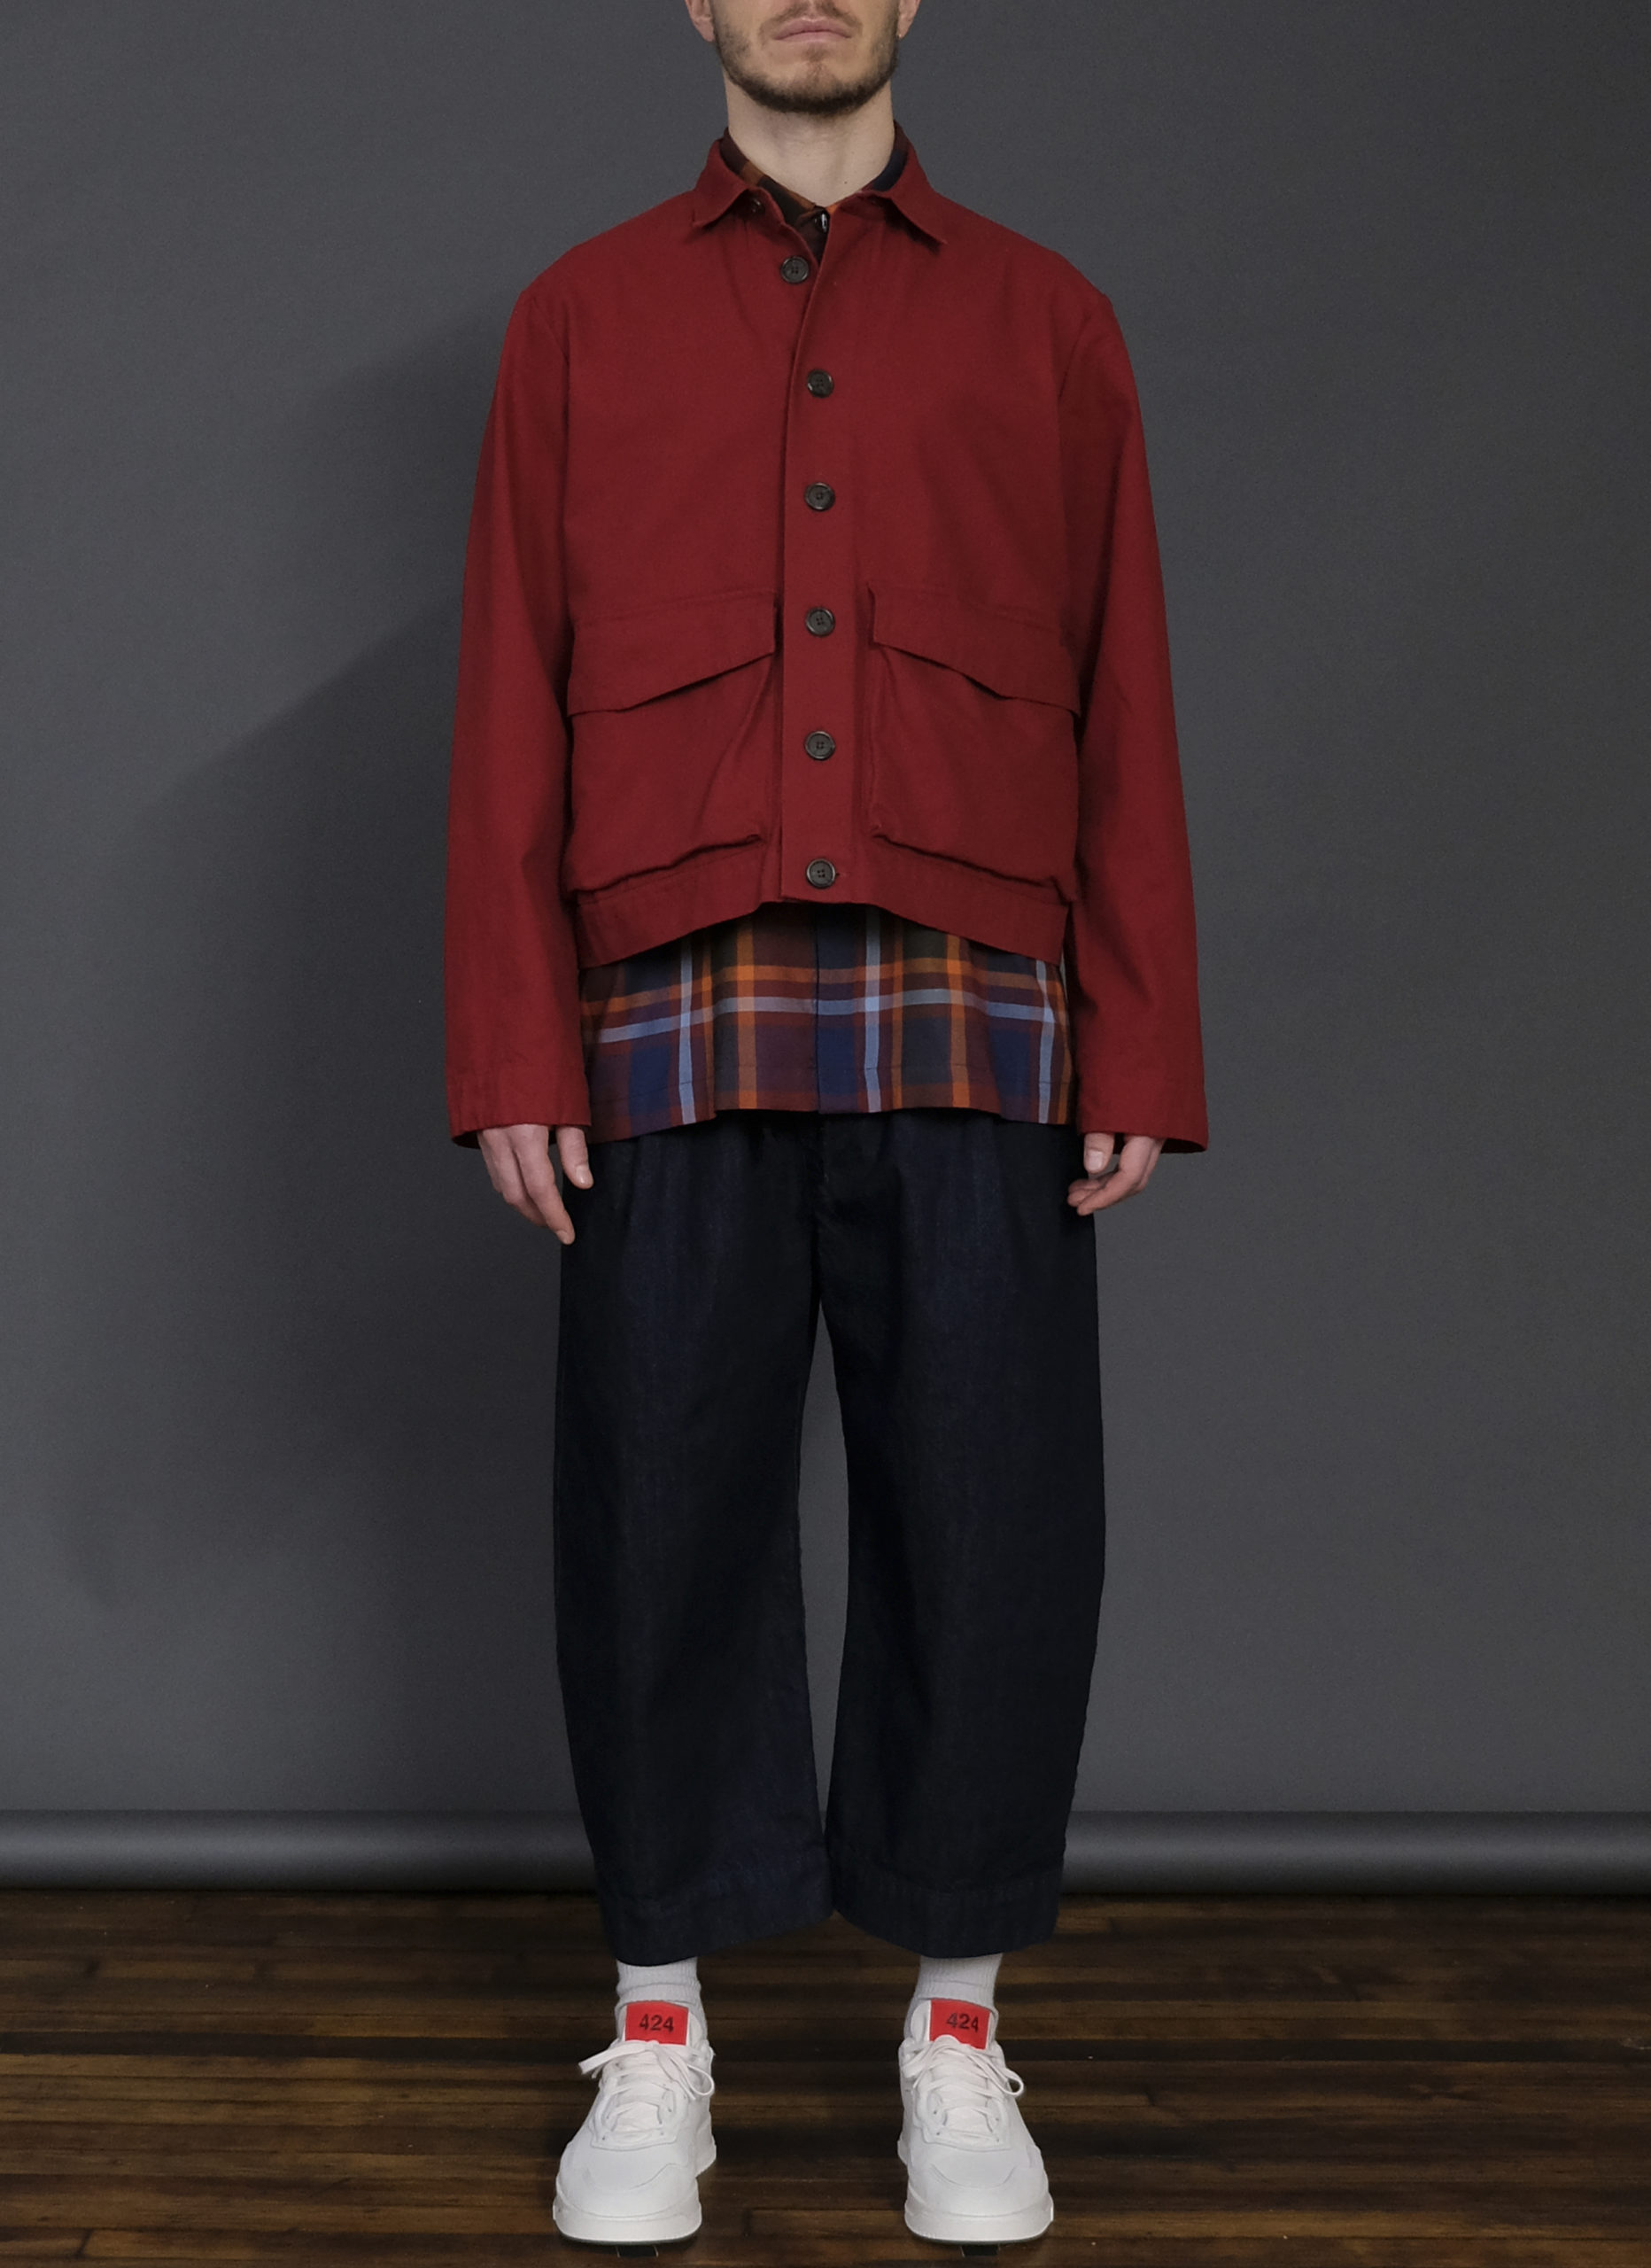 SACK POCKET IVY JACKET IN RED - GREI New York